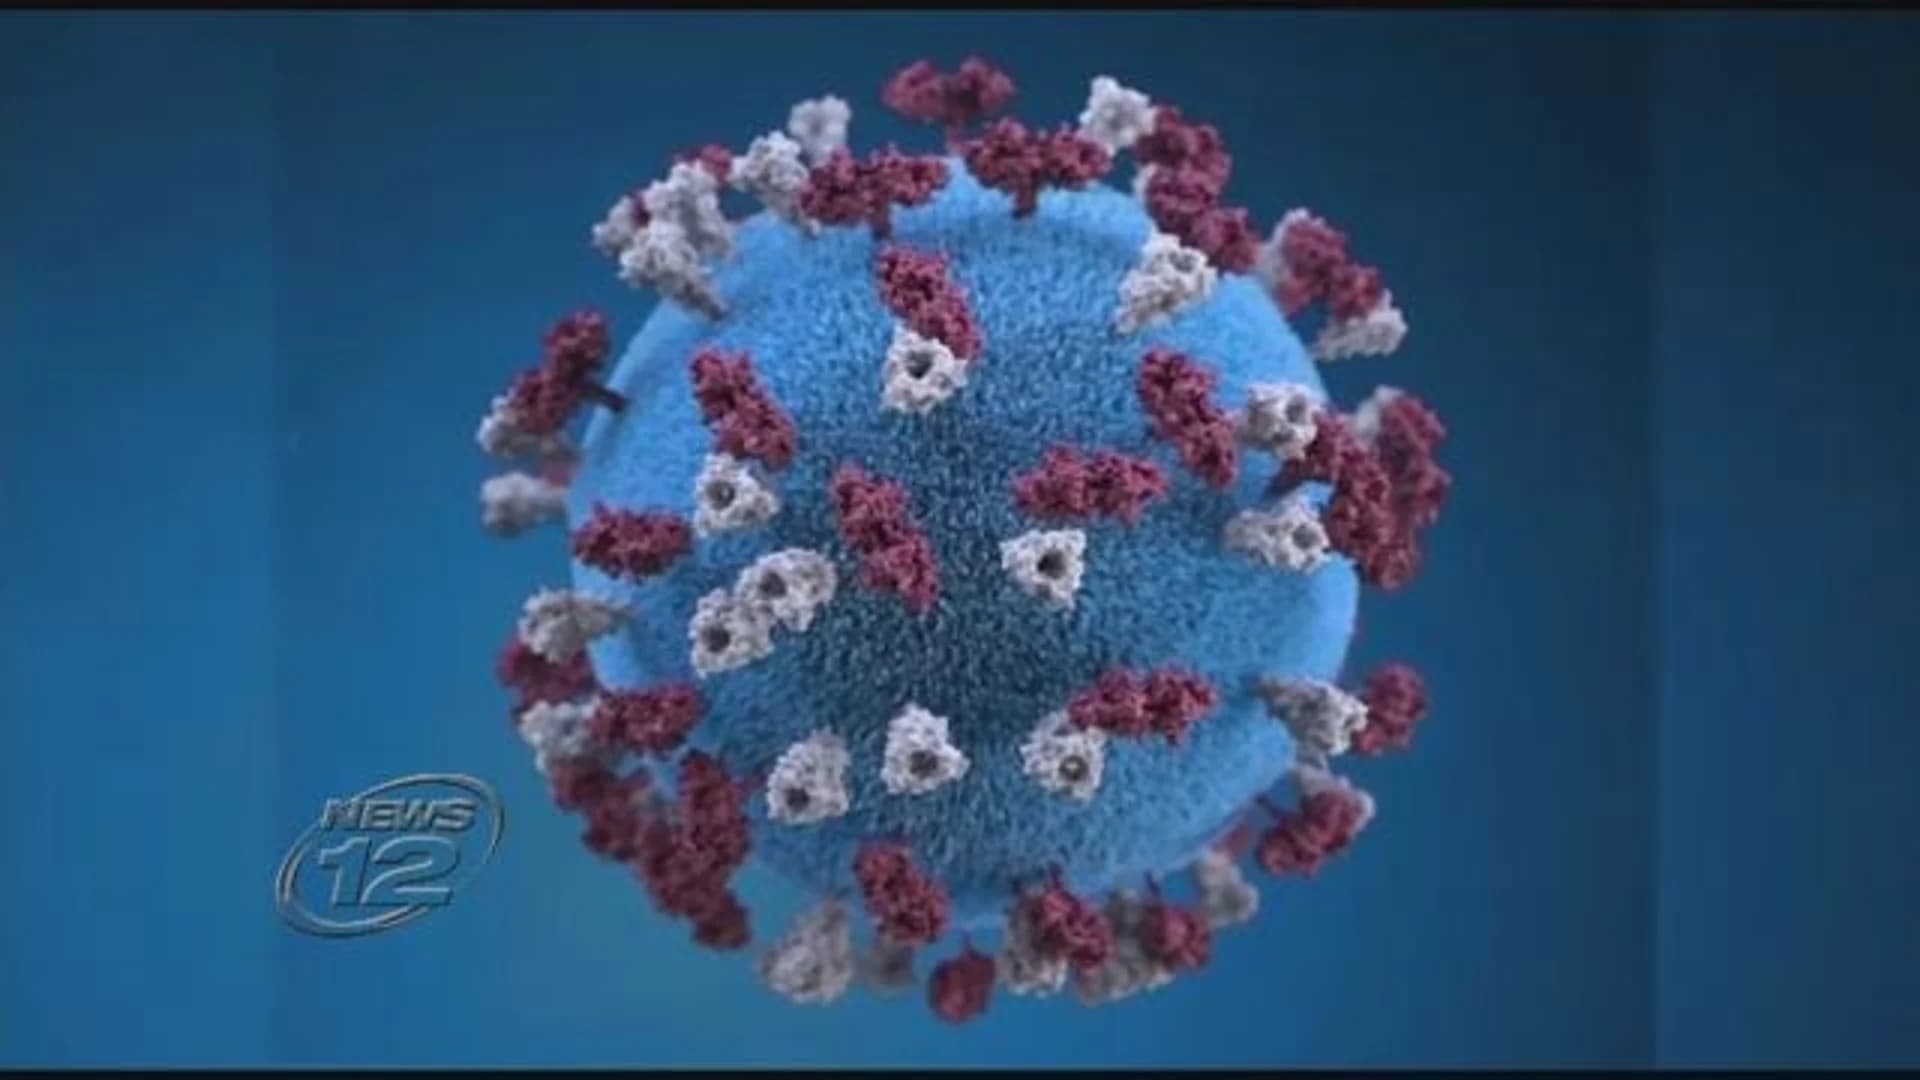 Monroe College student diagnosed with measles, campus sends alert